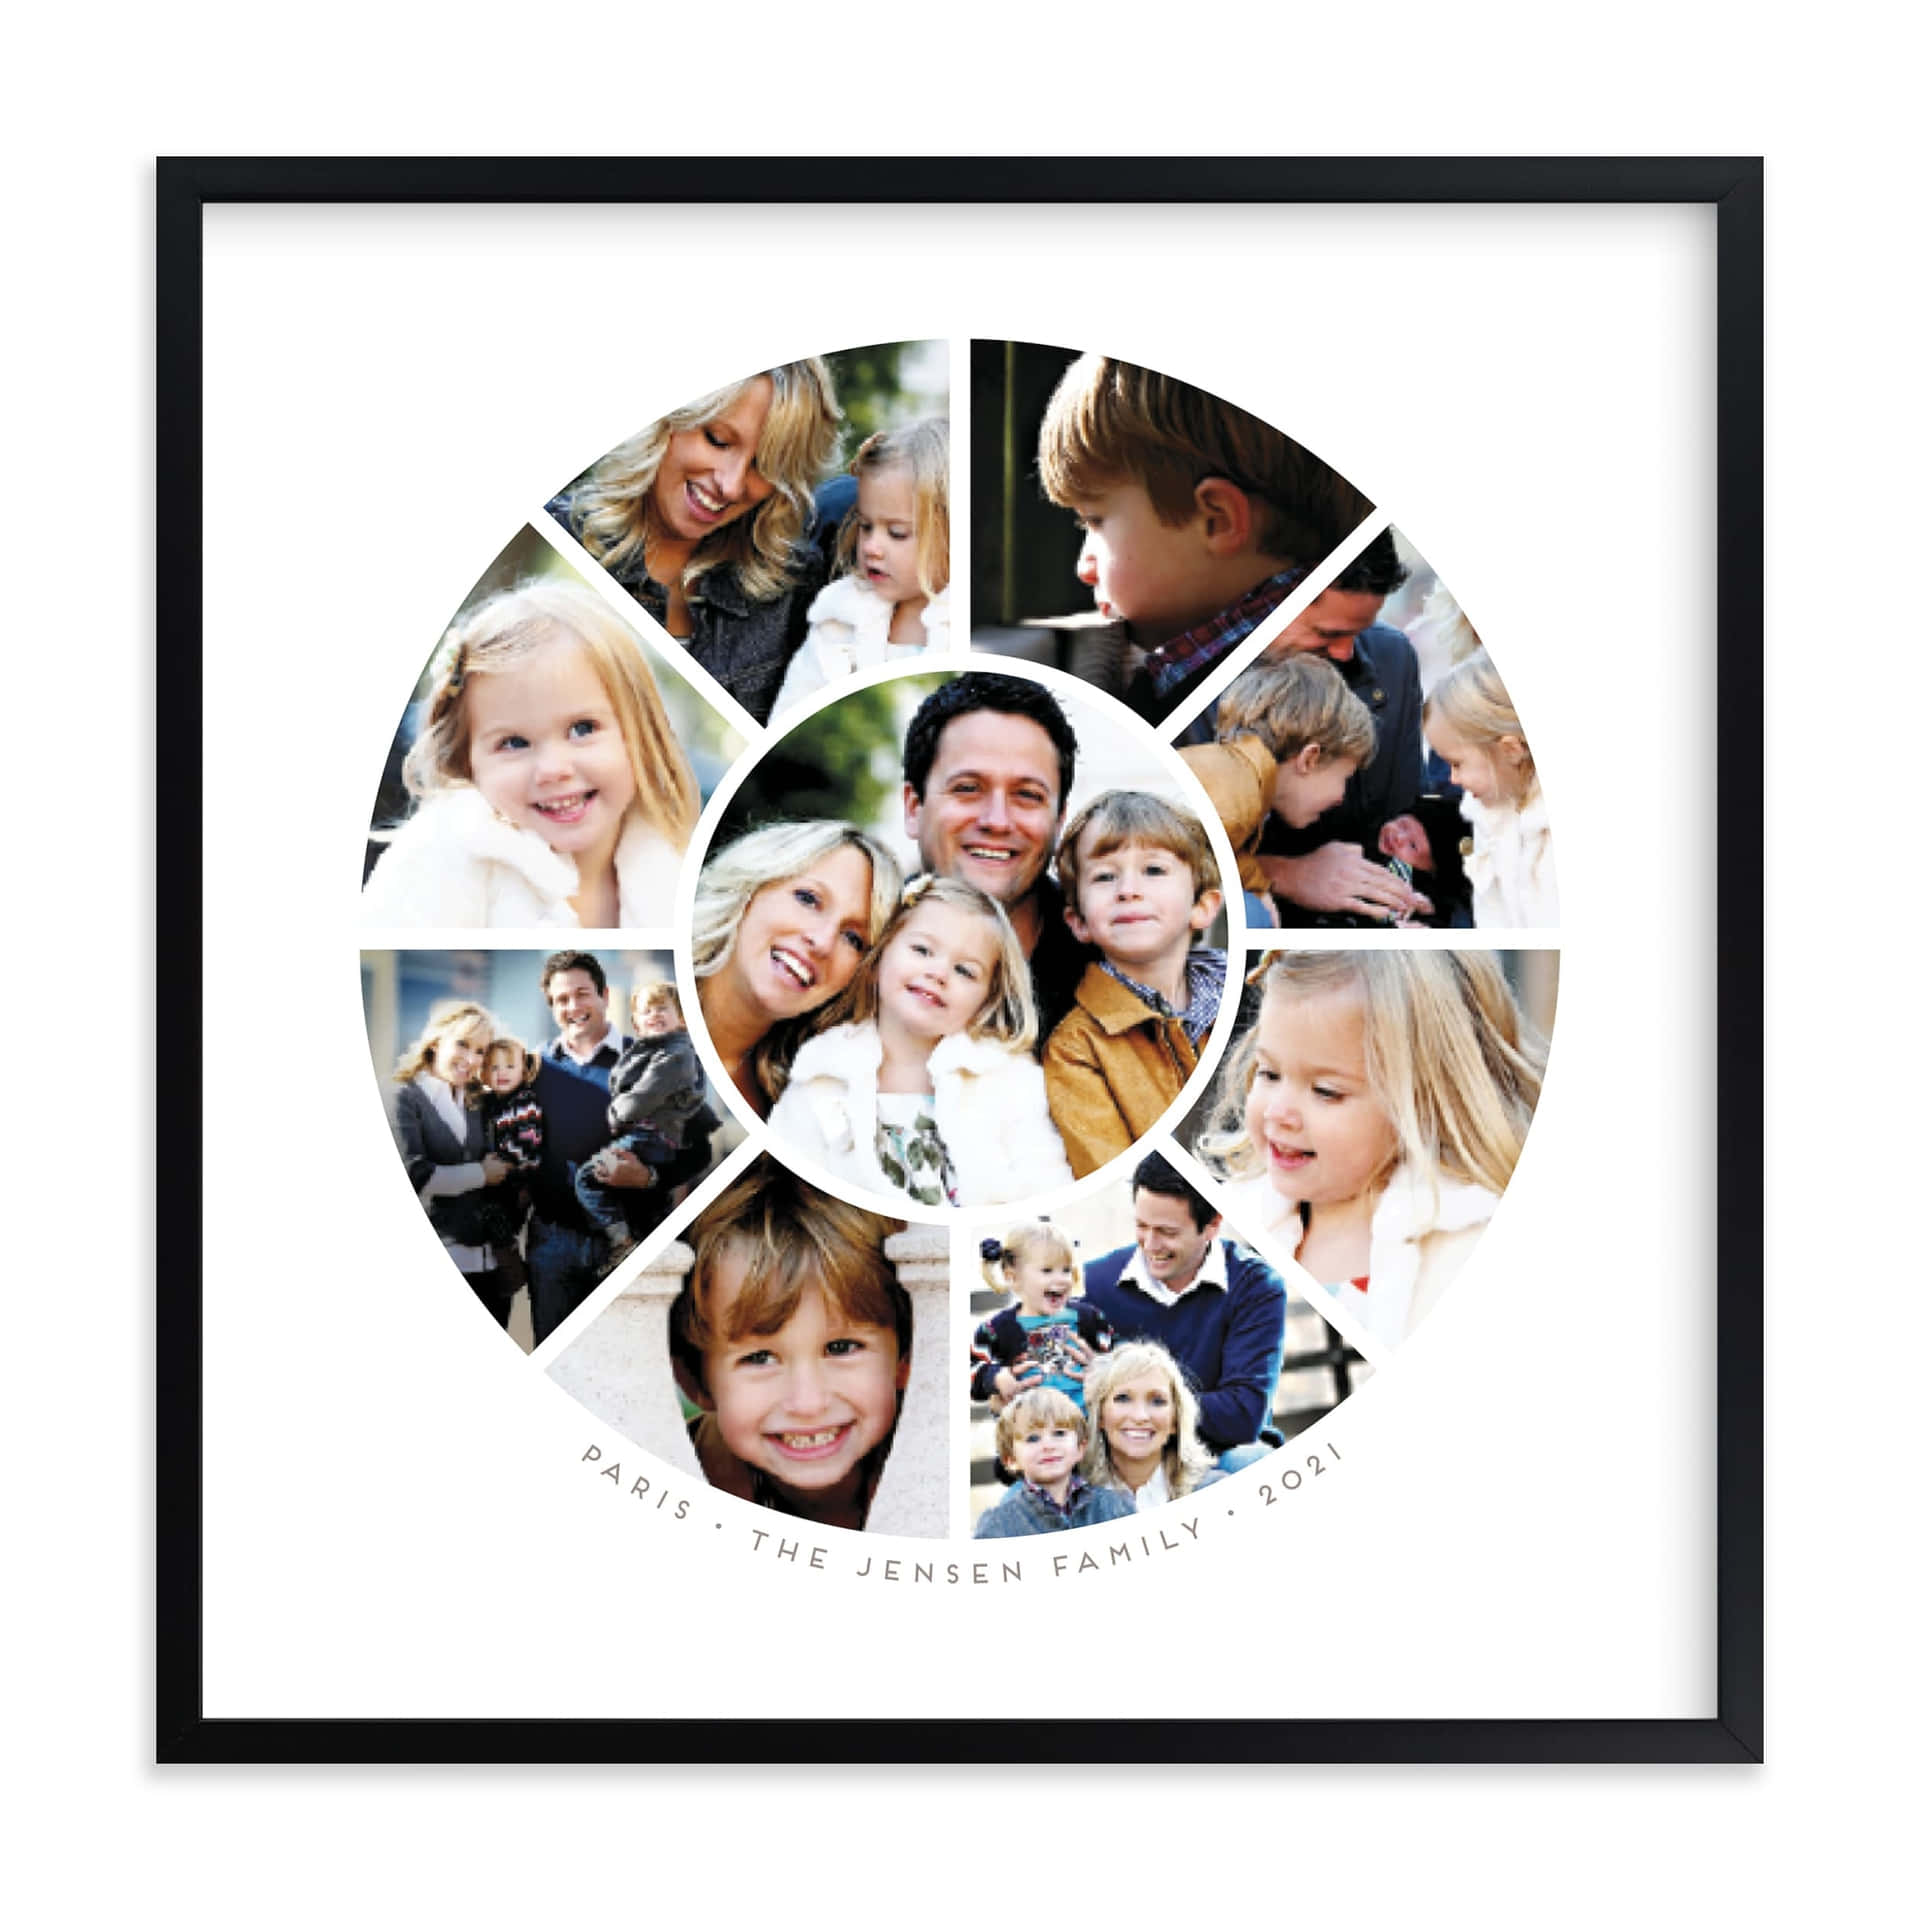 A Photo Of A Family In A Circle Frame